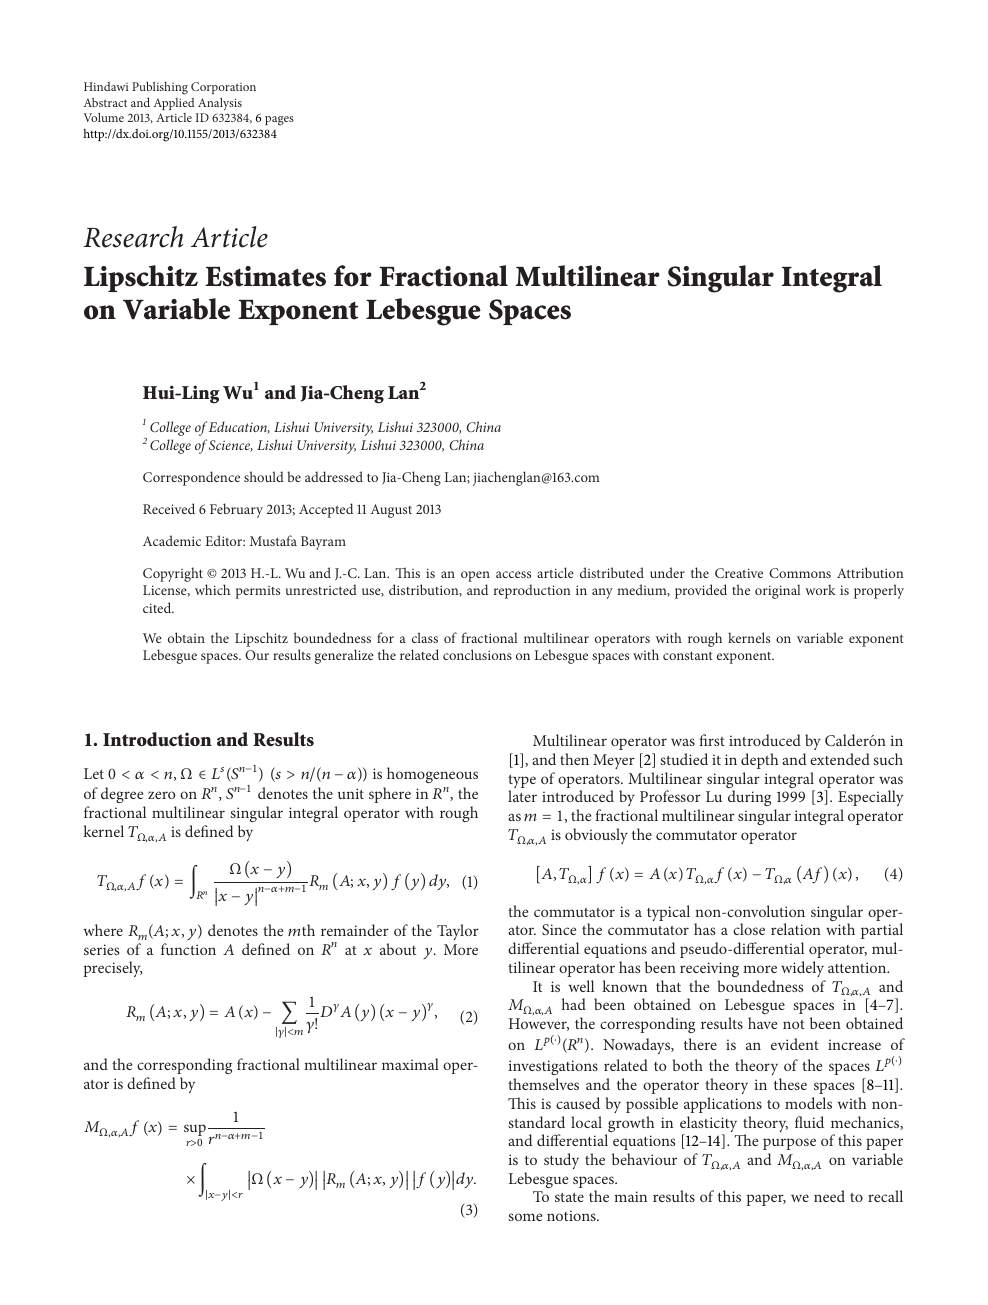 Lipschitz Estimates For Fractional Multilinear Singular Integral On Variable Exponent Lebesgue Spaces Topic Of Research Paper In Mathematics Download Scholarly Article Pdf And Read For Free On Cyberleninka Open Science Hub